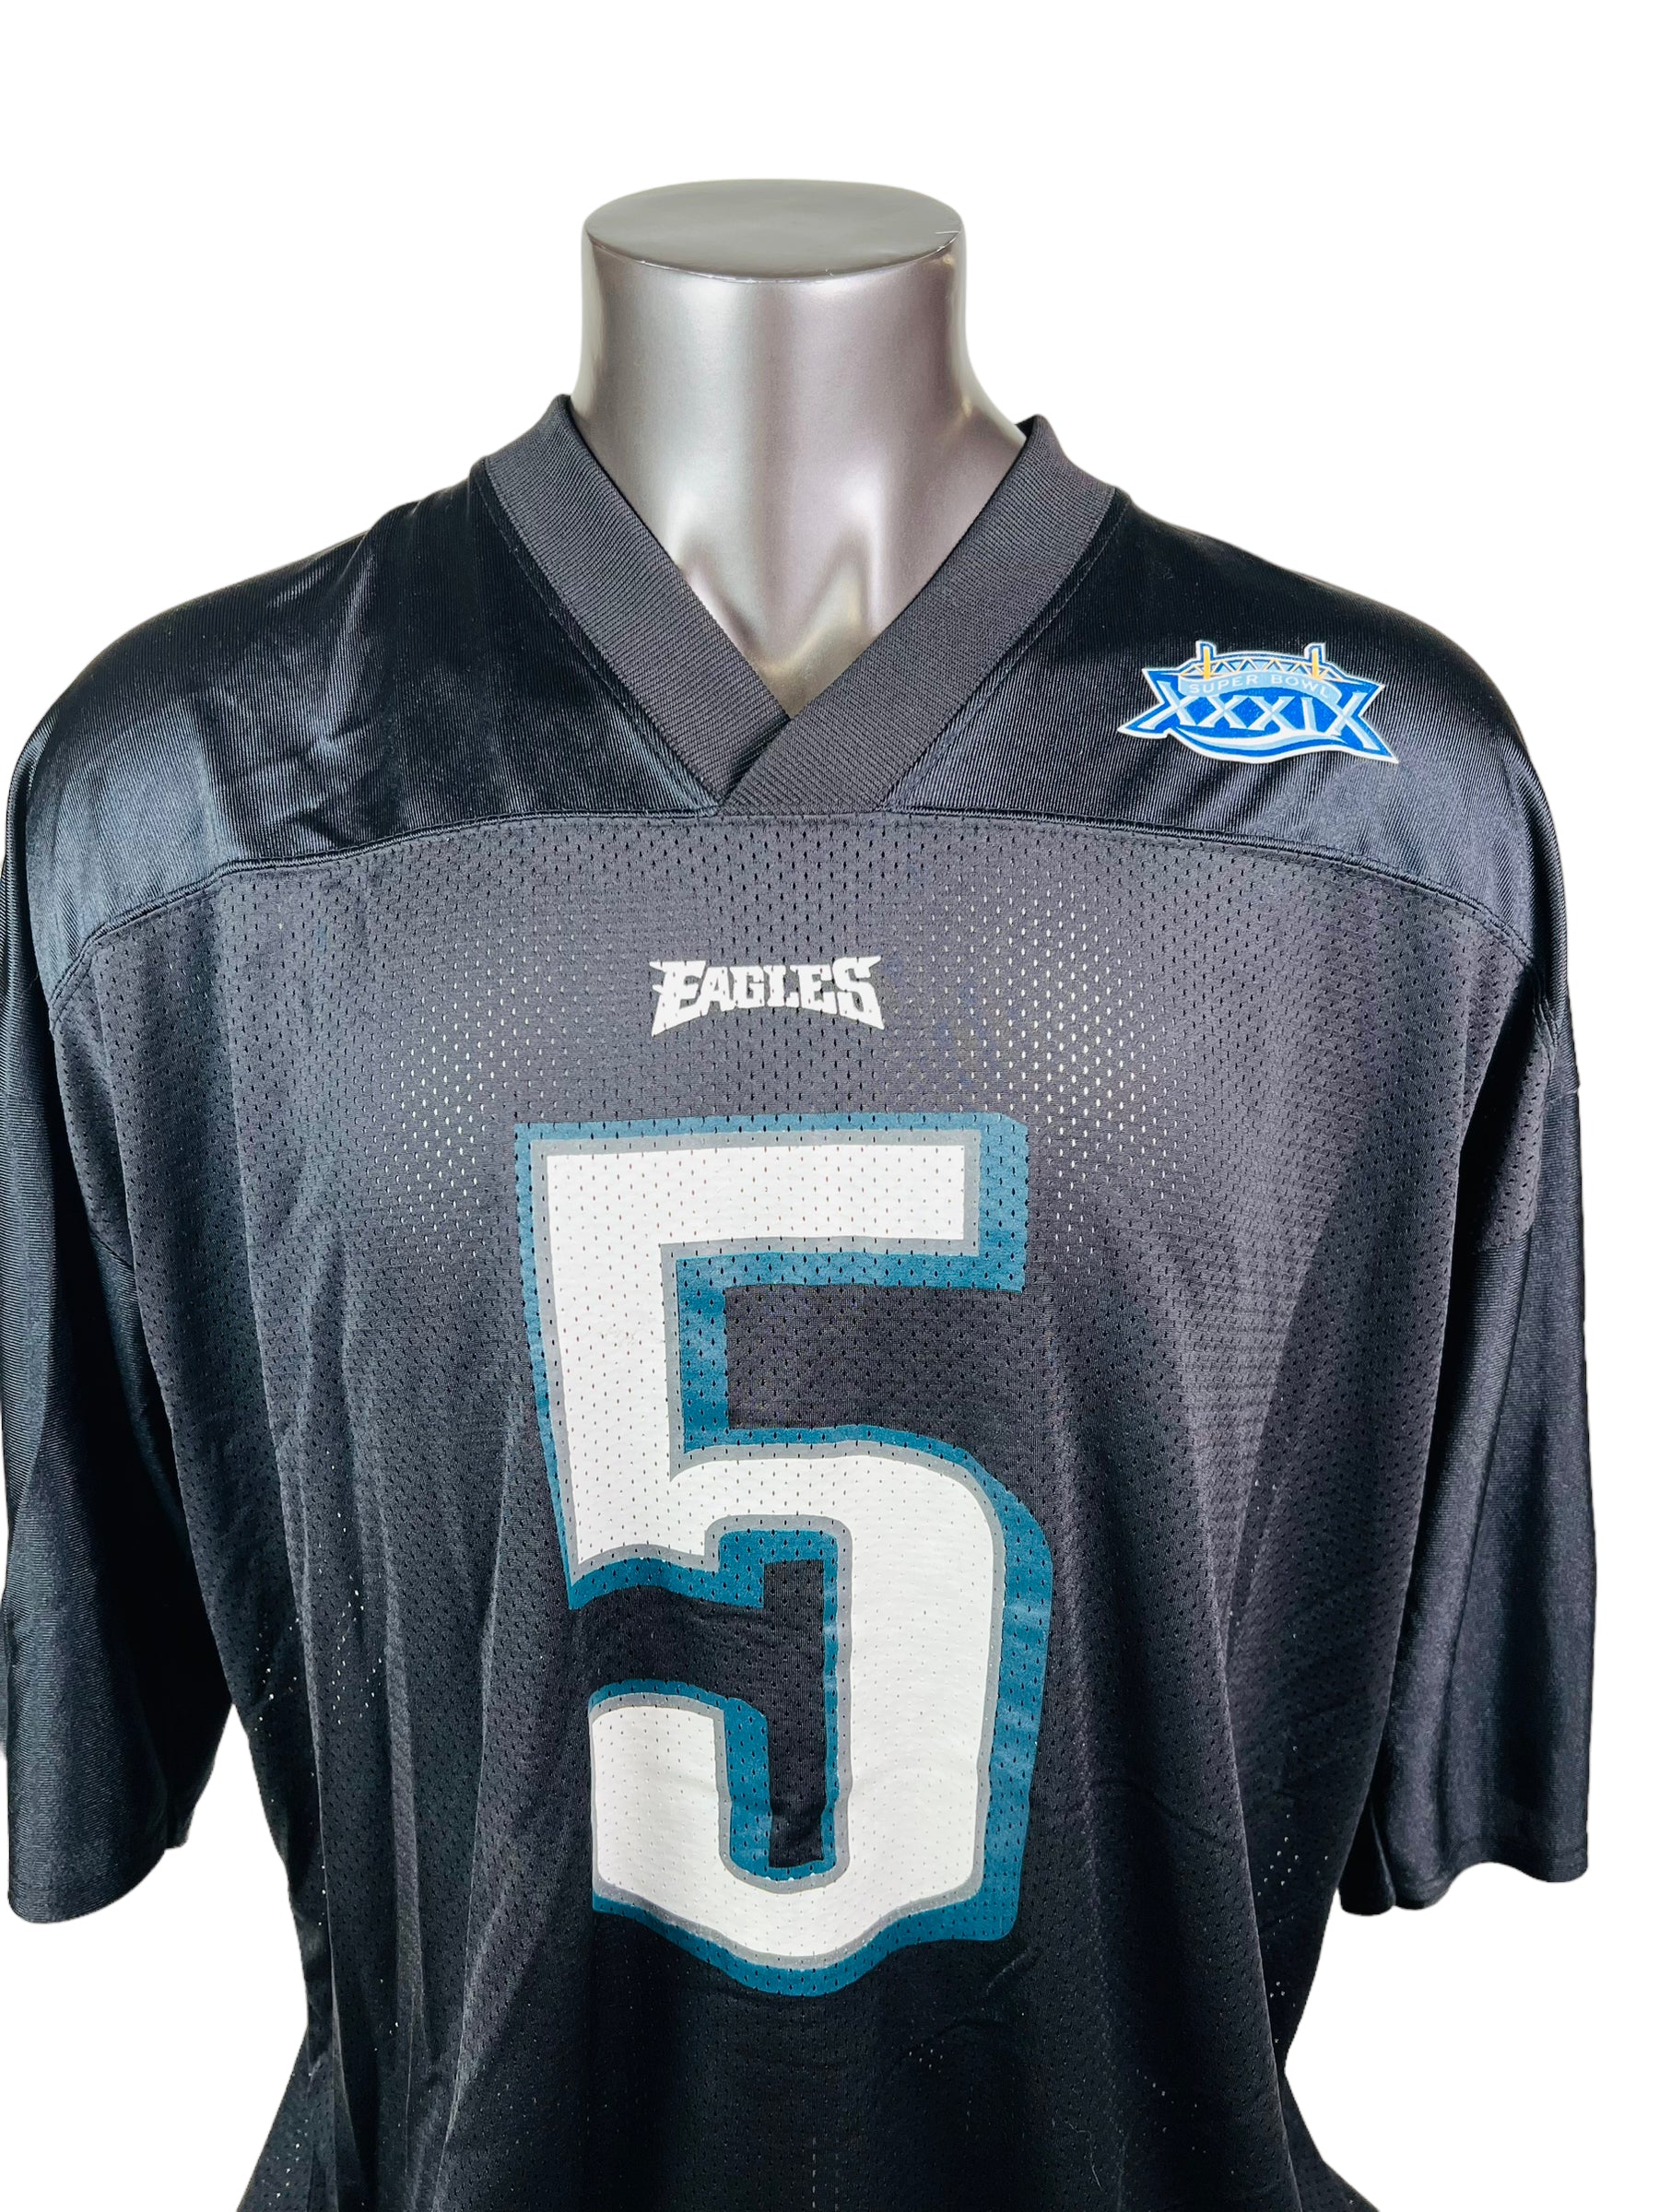 Donovan Mcnabb's jersey number of days until the start of the NFL